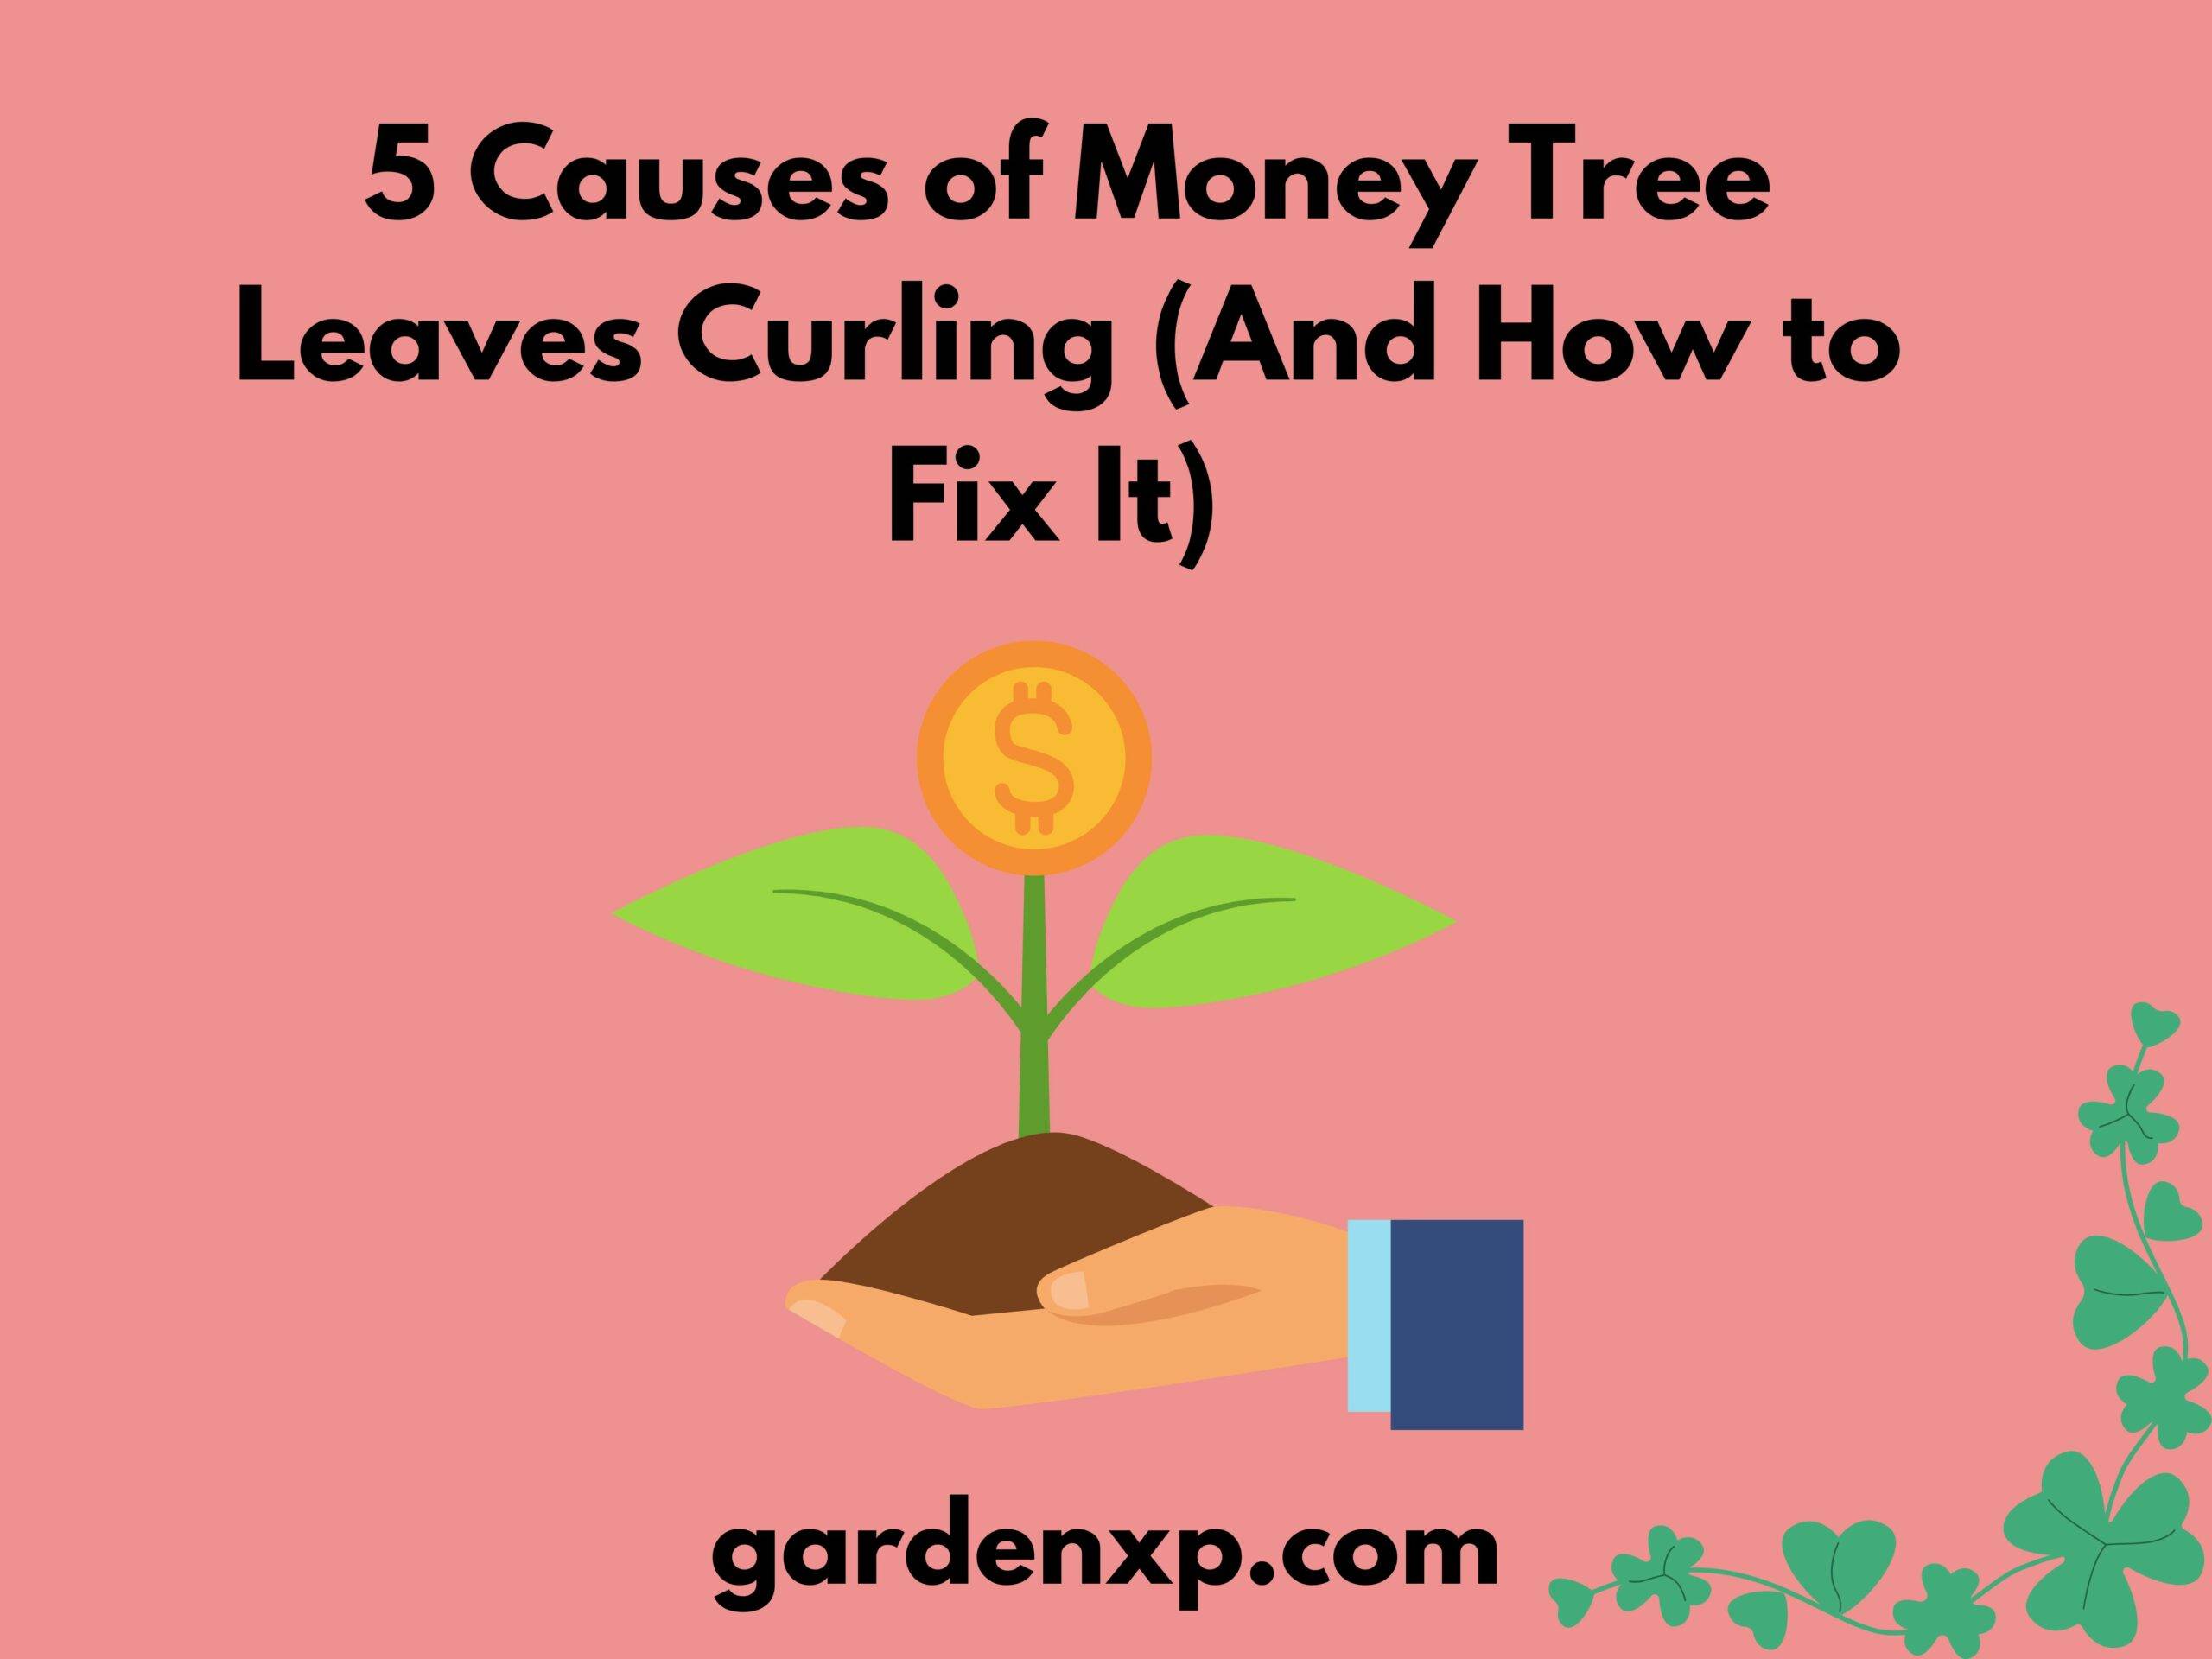 5 Causes of Money Tree Leaves Curling (And How to Fix It)